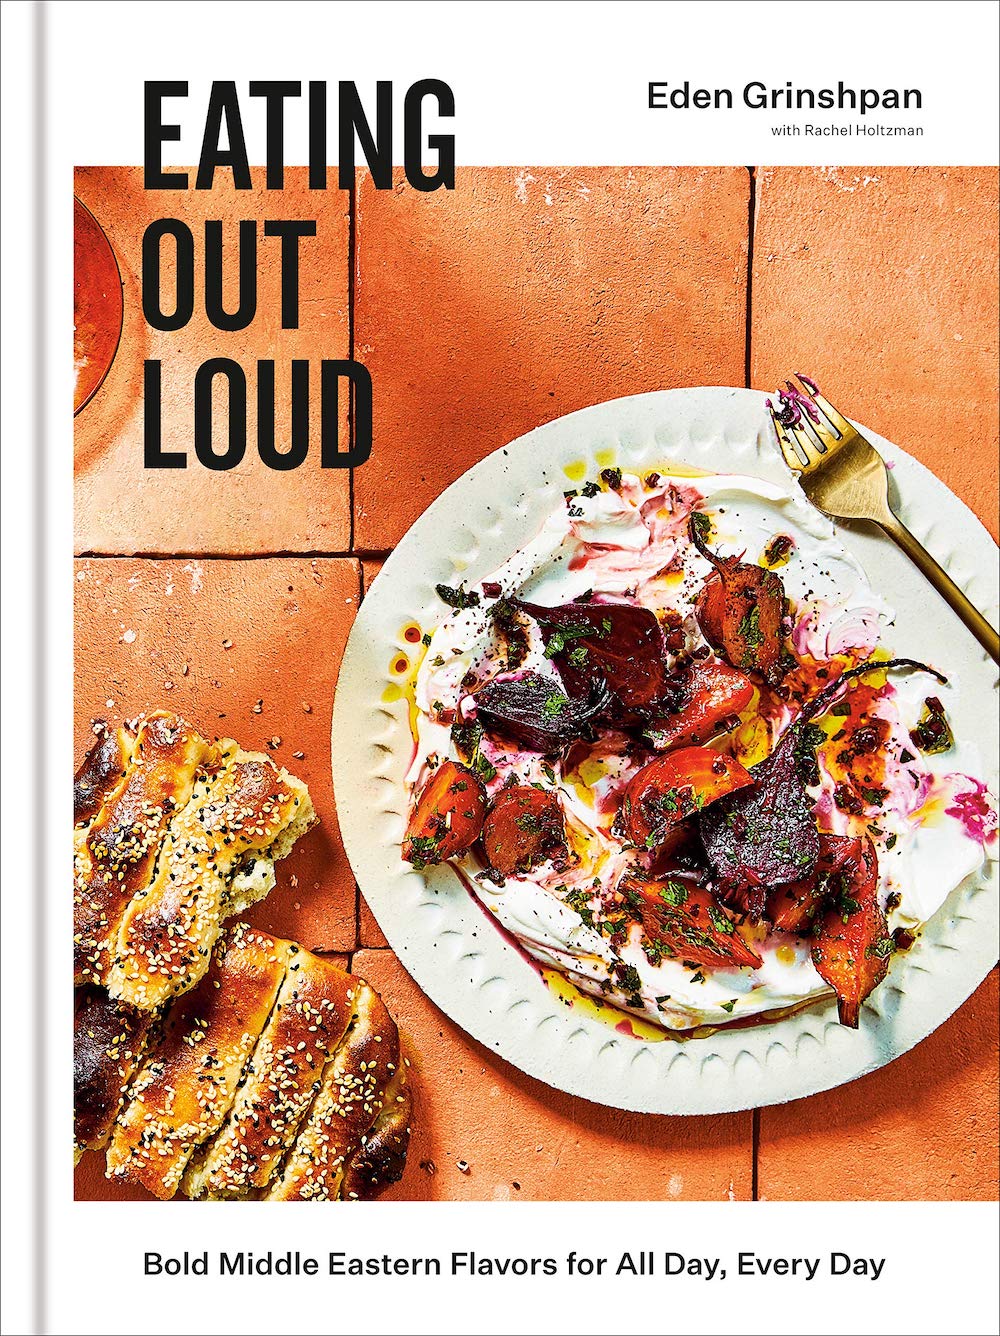 20 Best Gourmet Cooking Books of All Time - BookAuthority